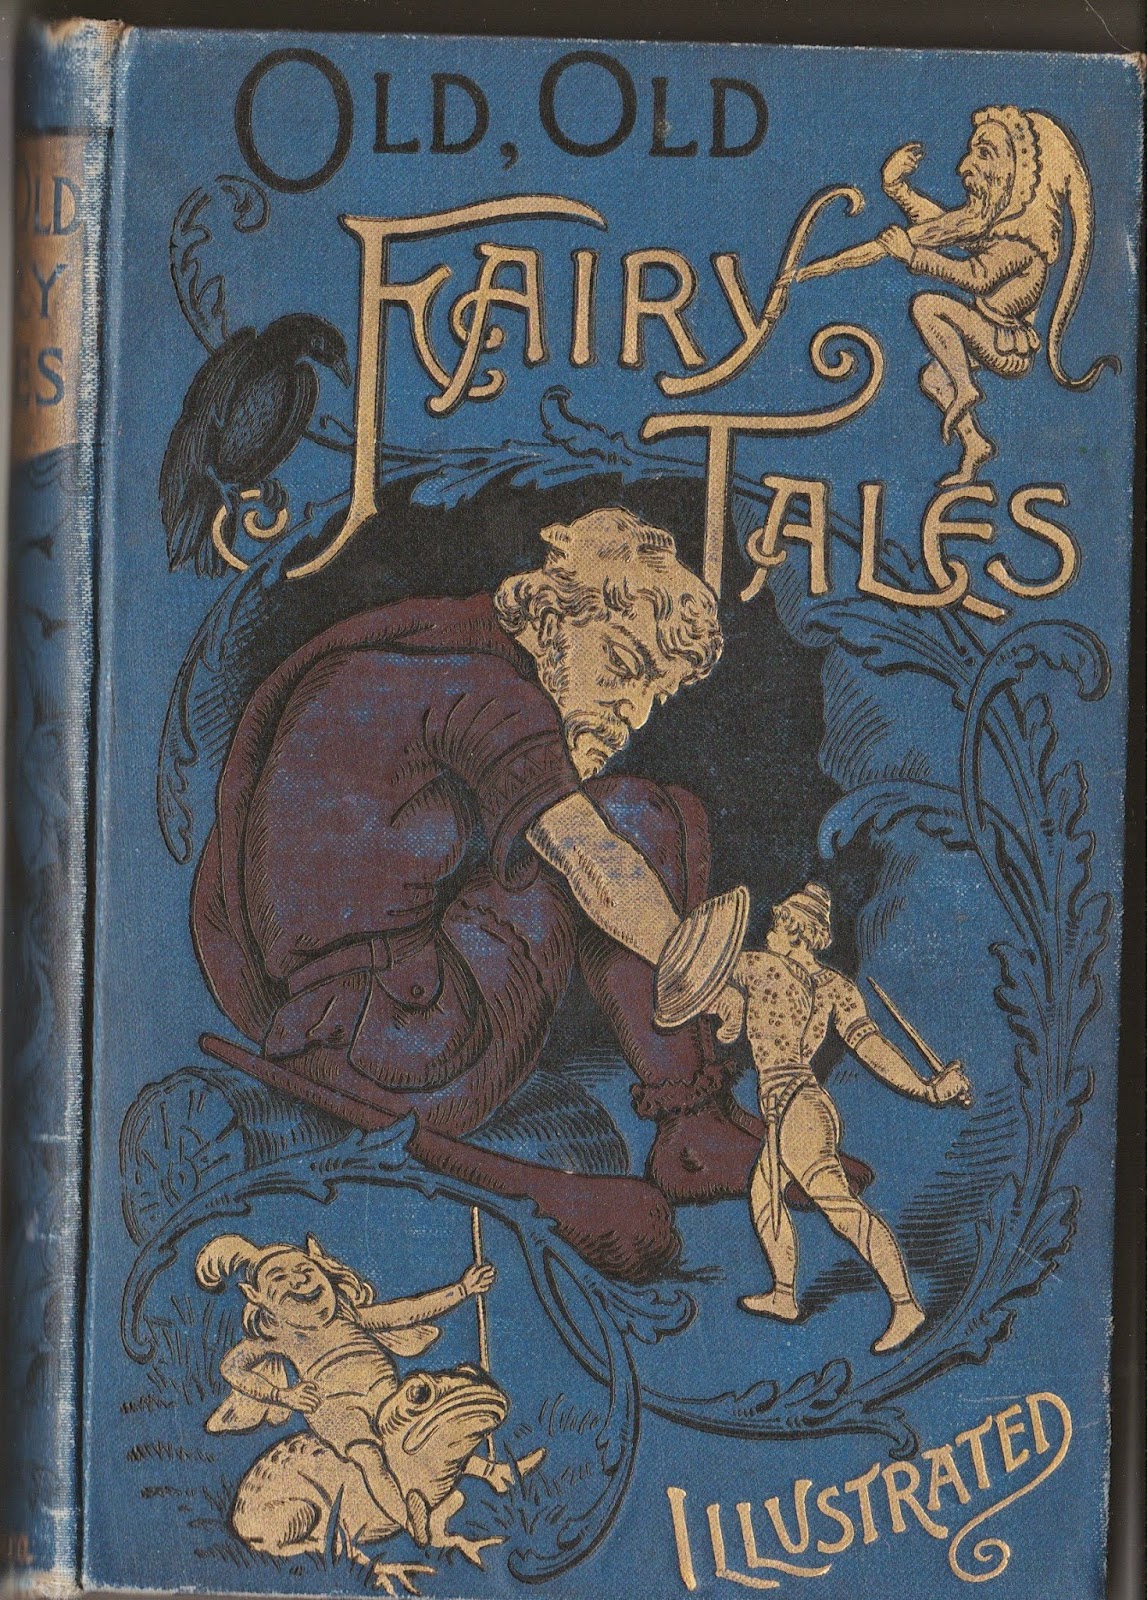 Old, Old Fairy Tales